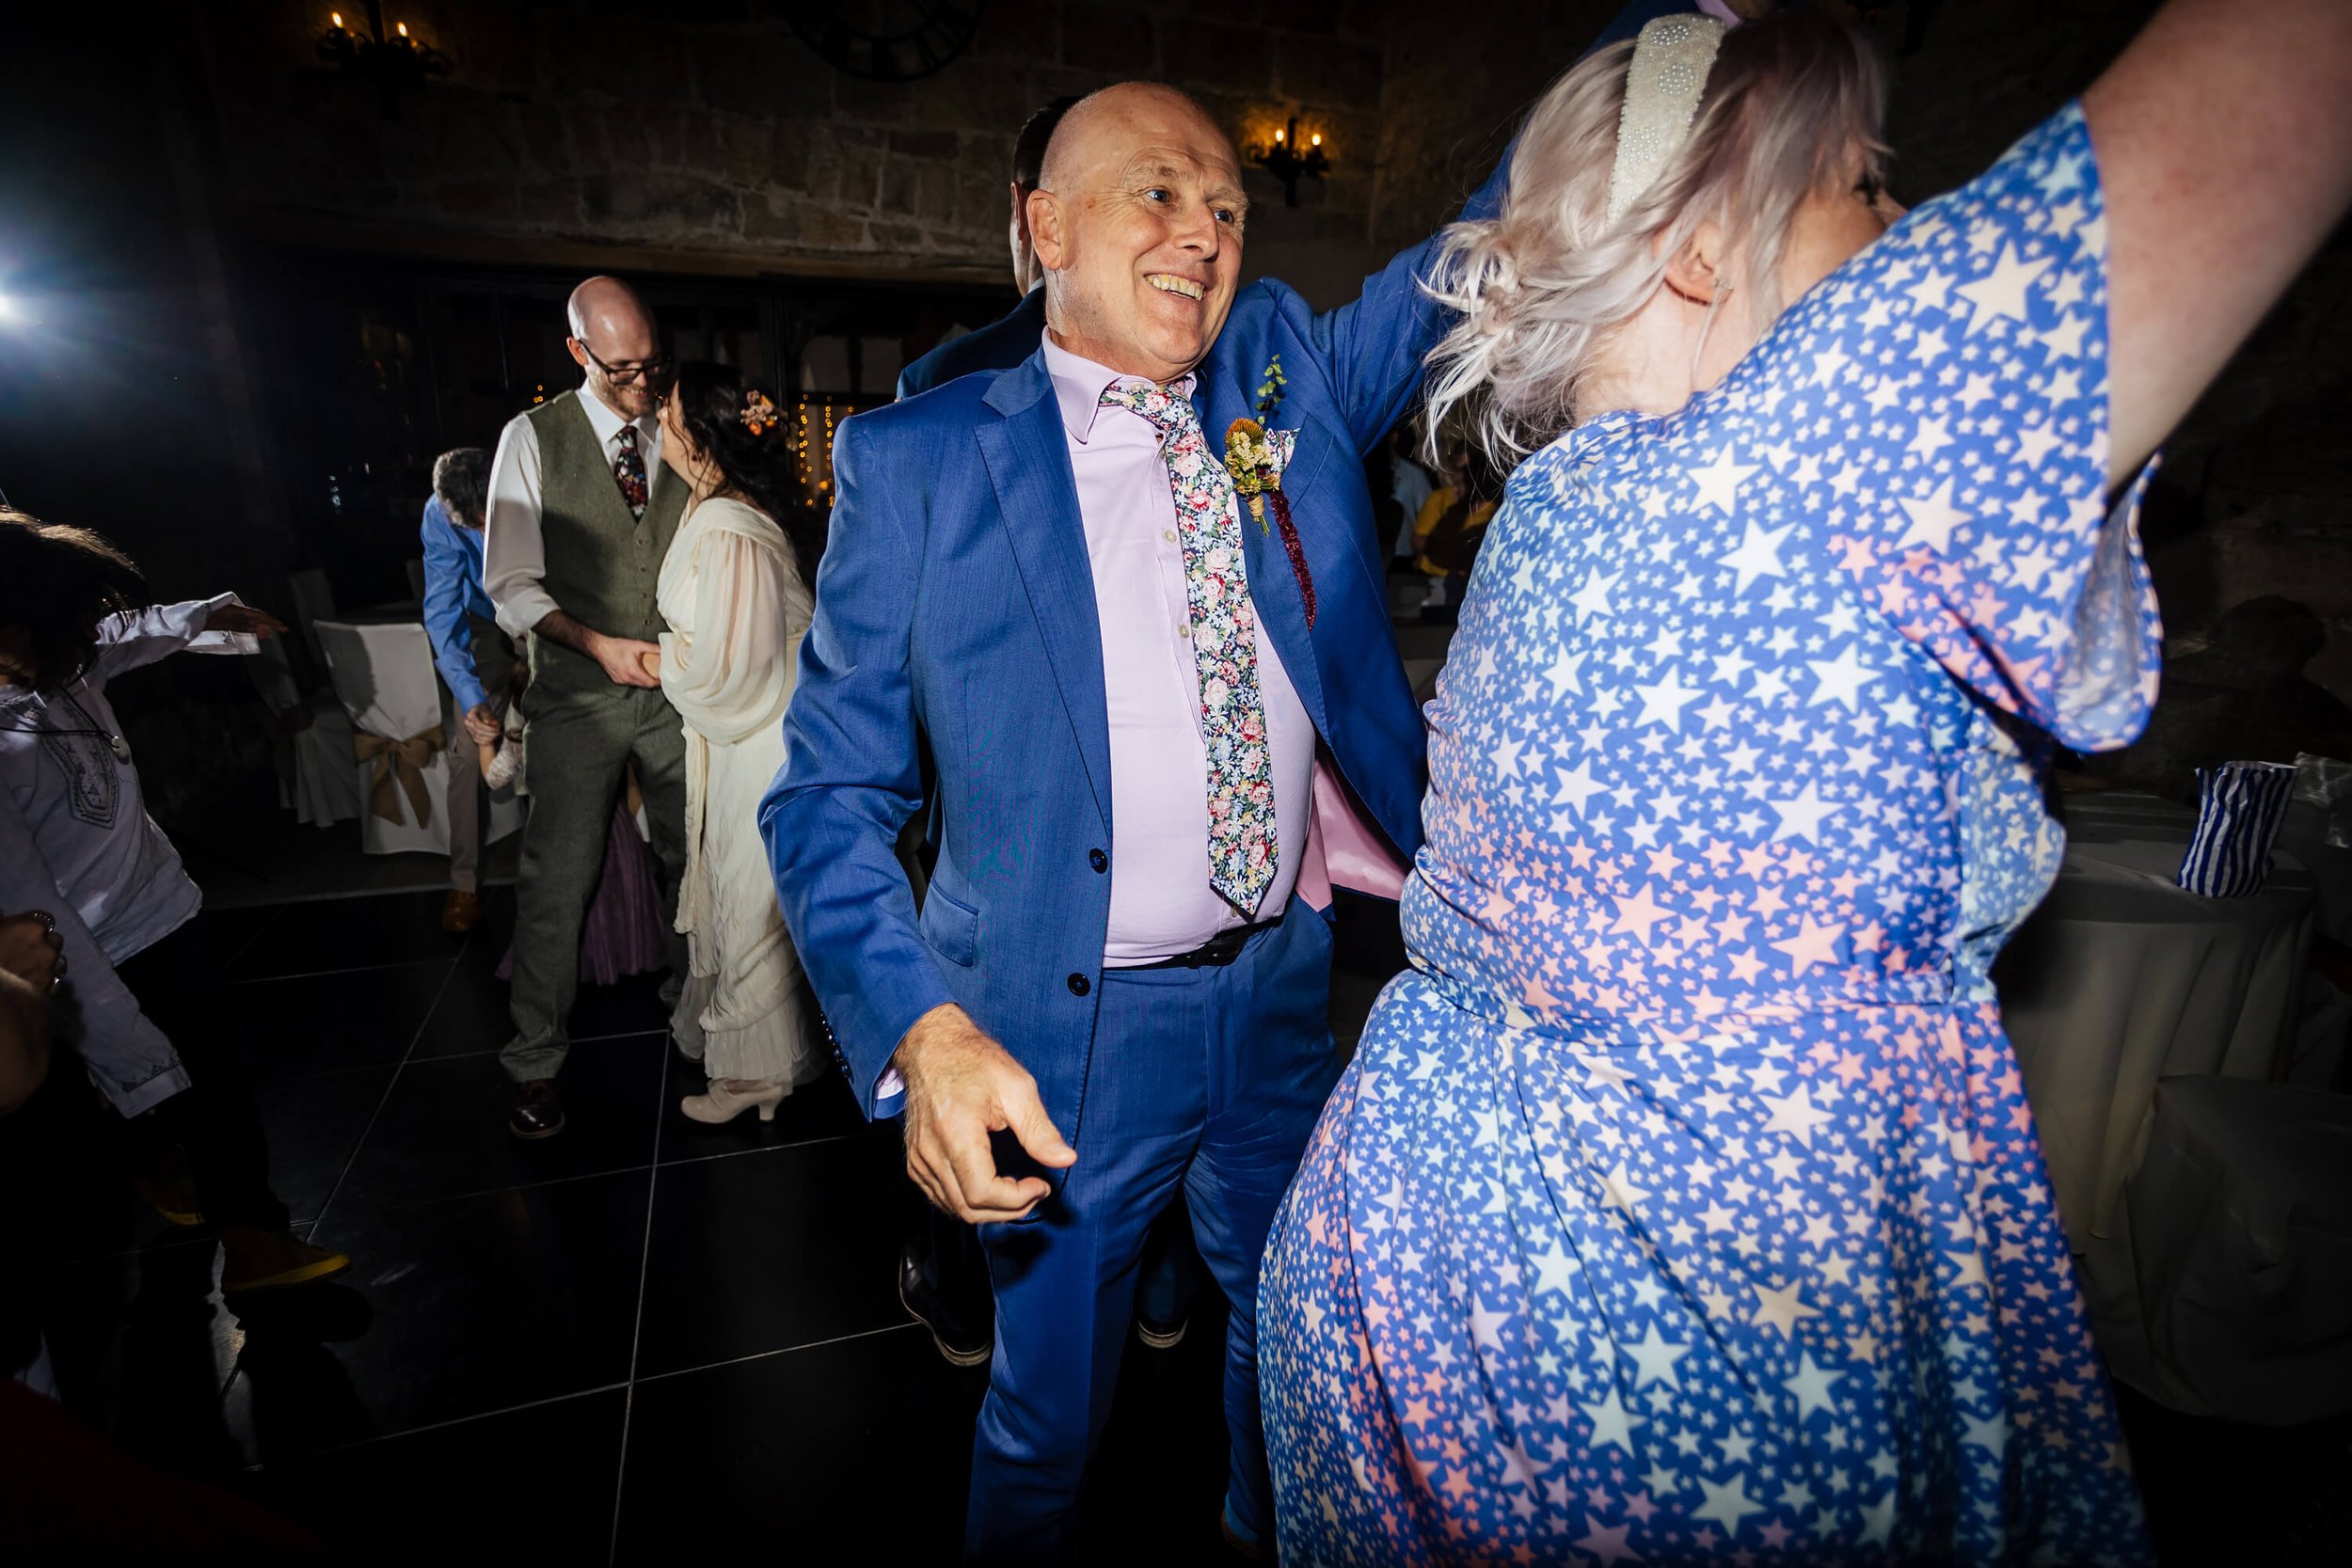 Wedding guests dancing at a Barden Tower reception